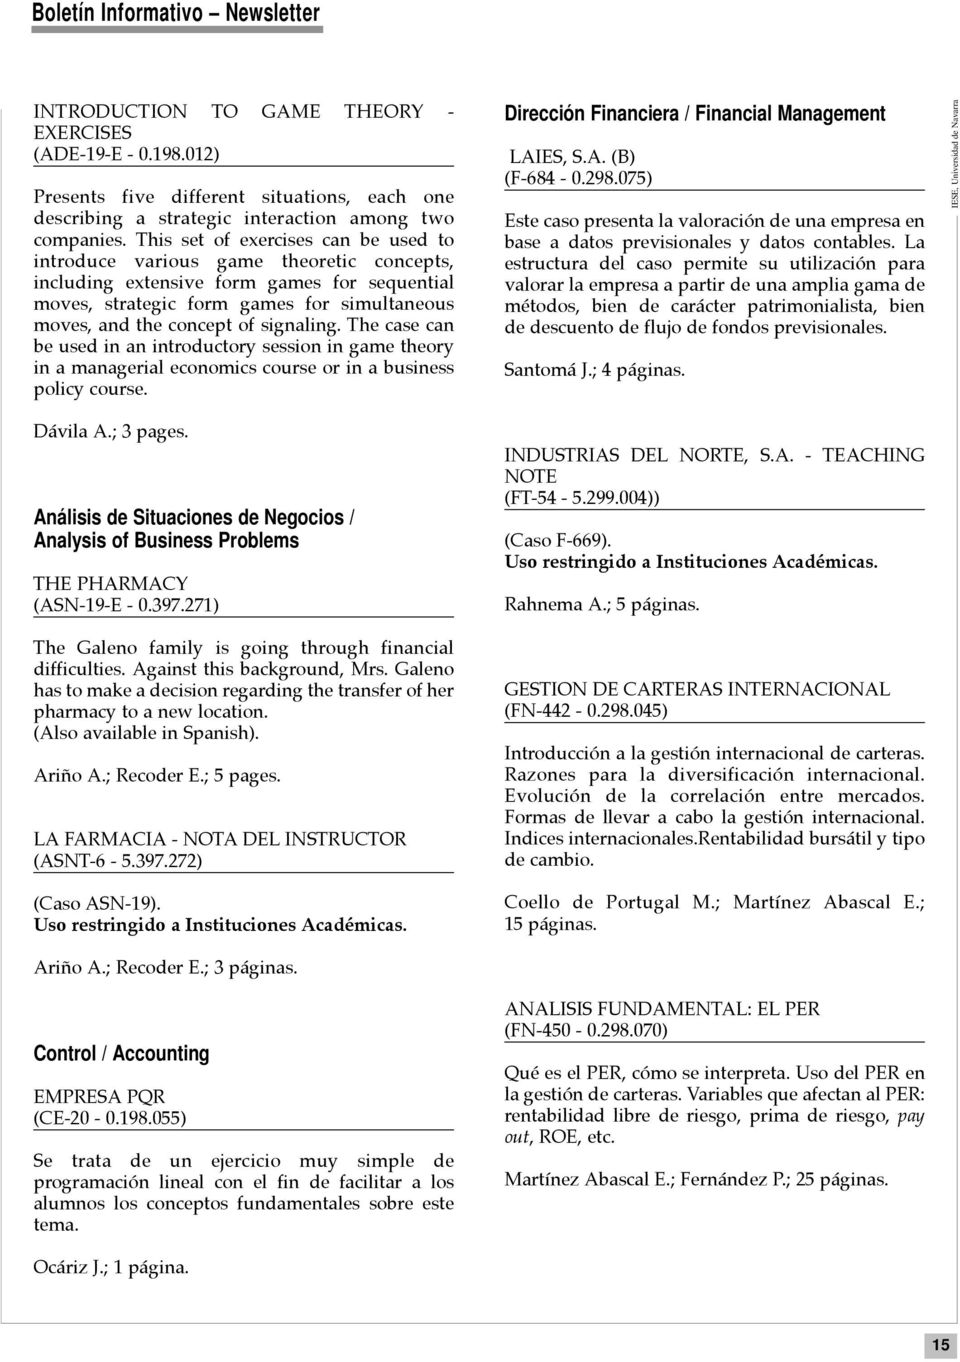 signaling. The case can be used in an introductory session in game theory in a managerial economics course or in a business policy course. D vila A.; 3 pages.